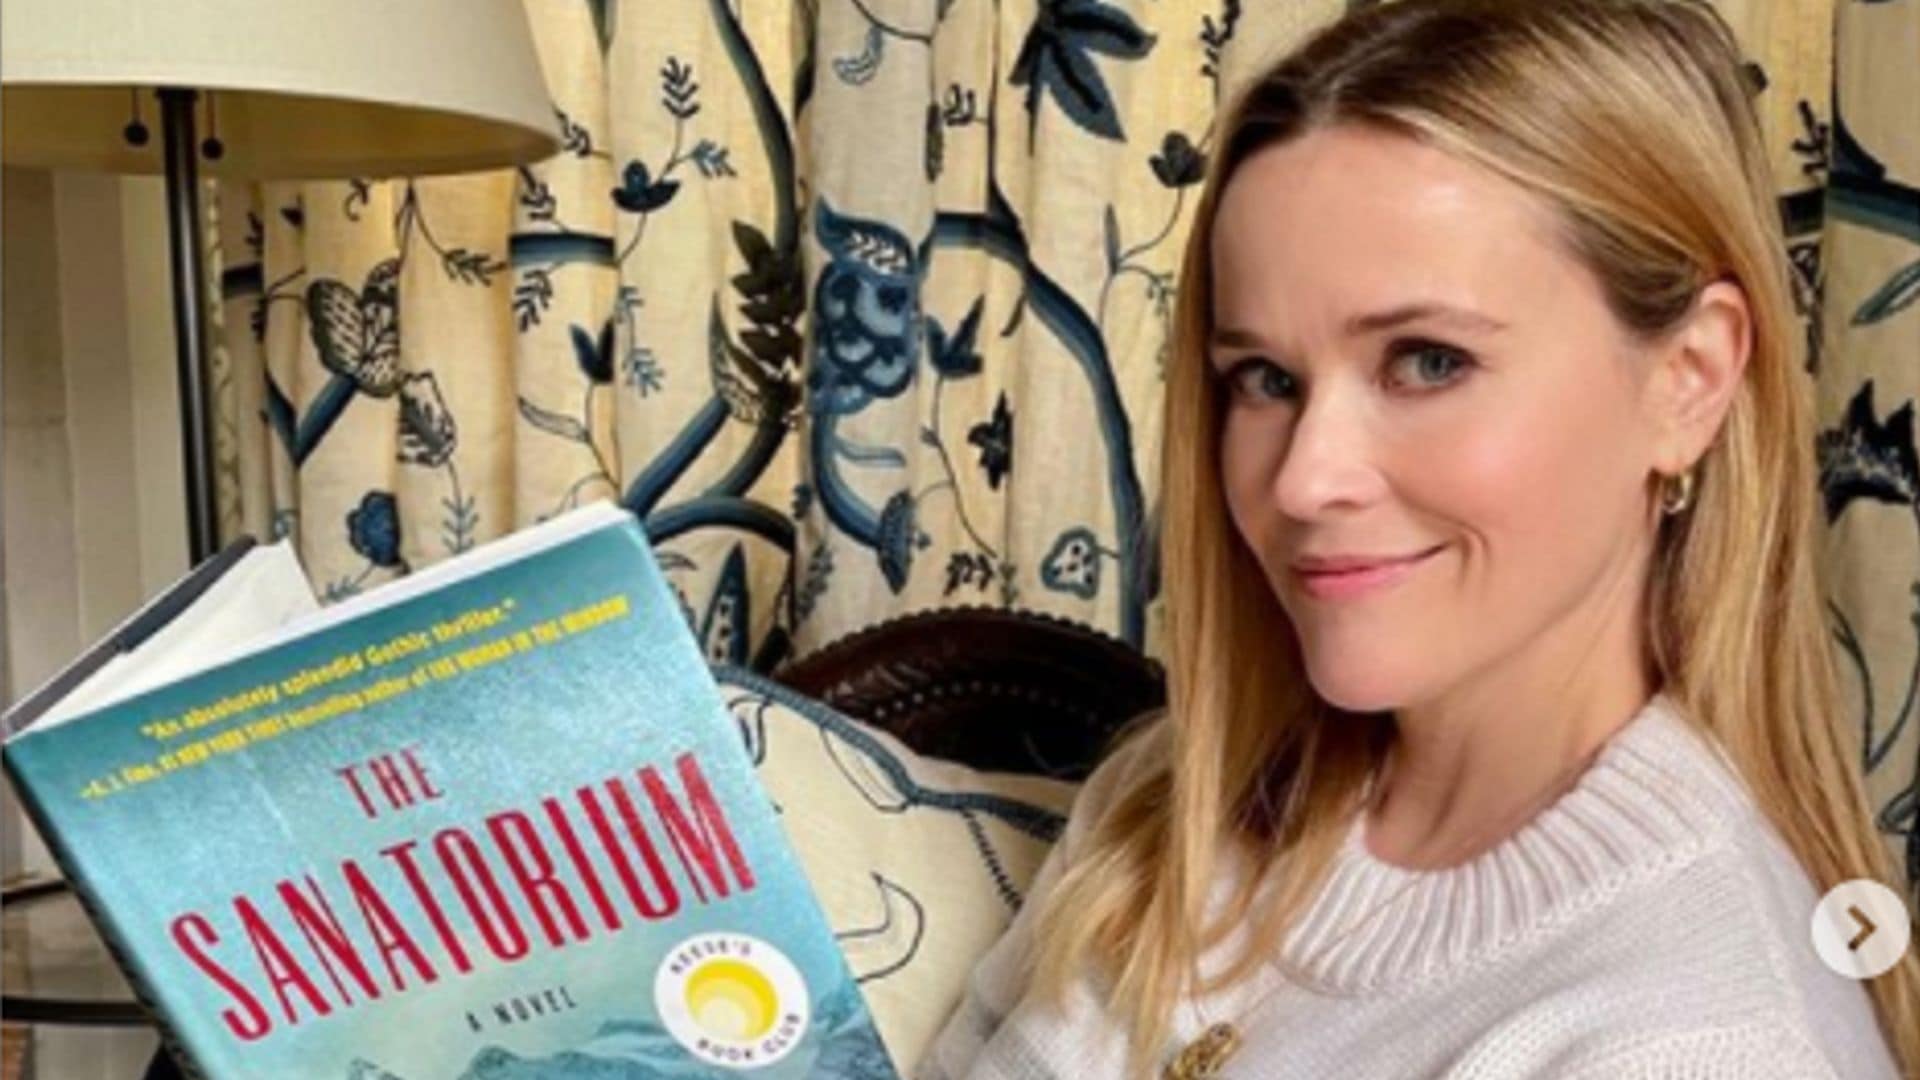 Reese Witherspoon’s popular book club now has a free, interactive app